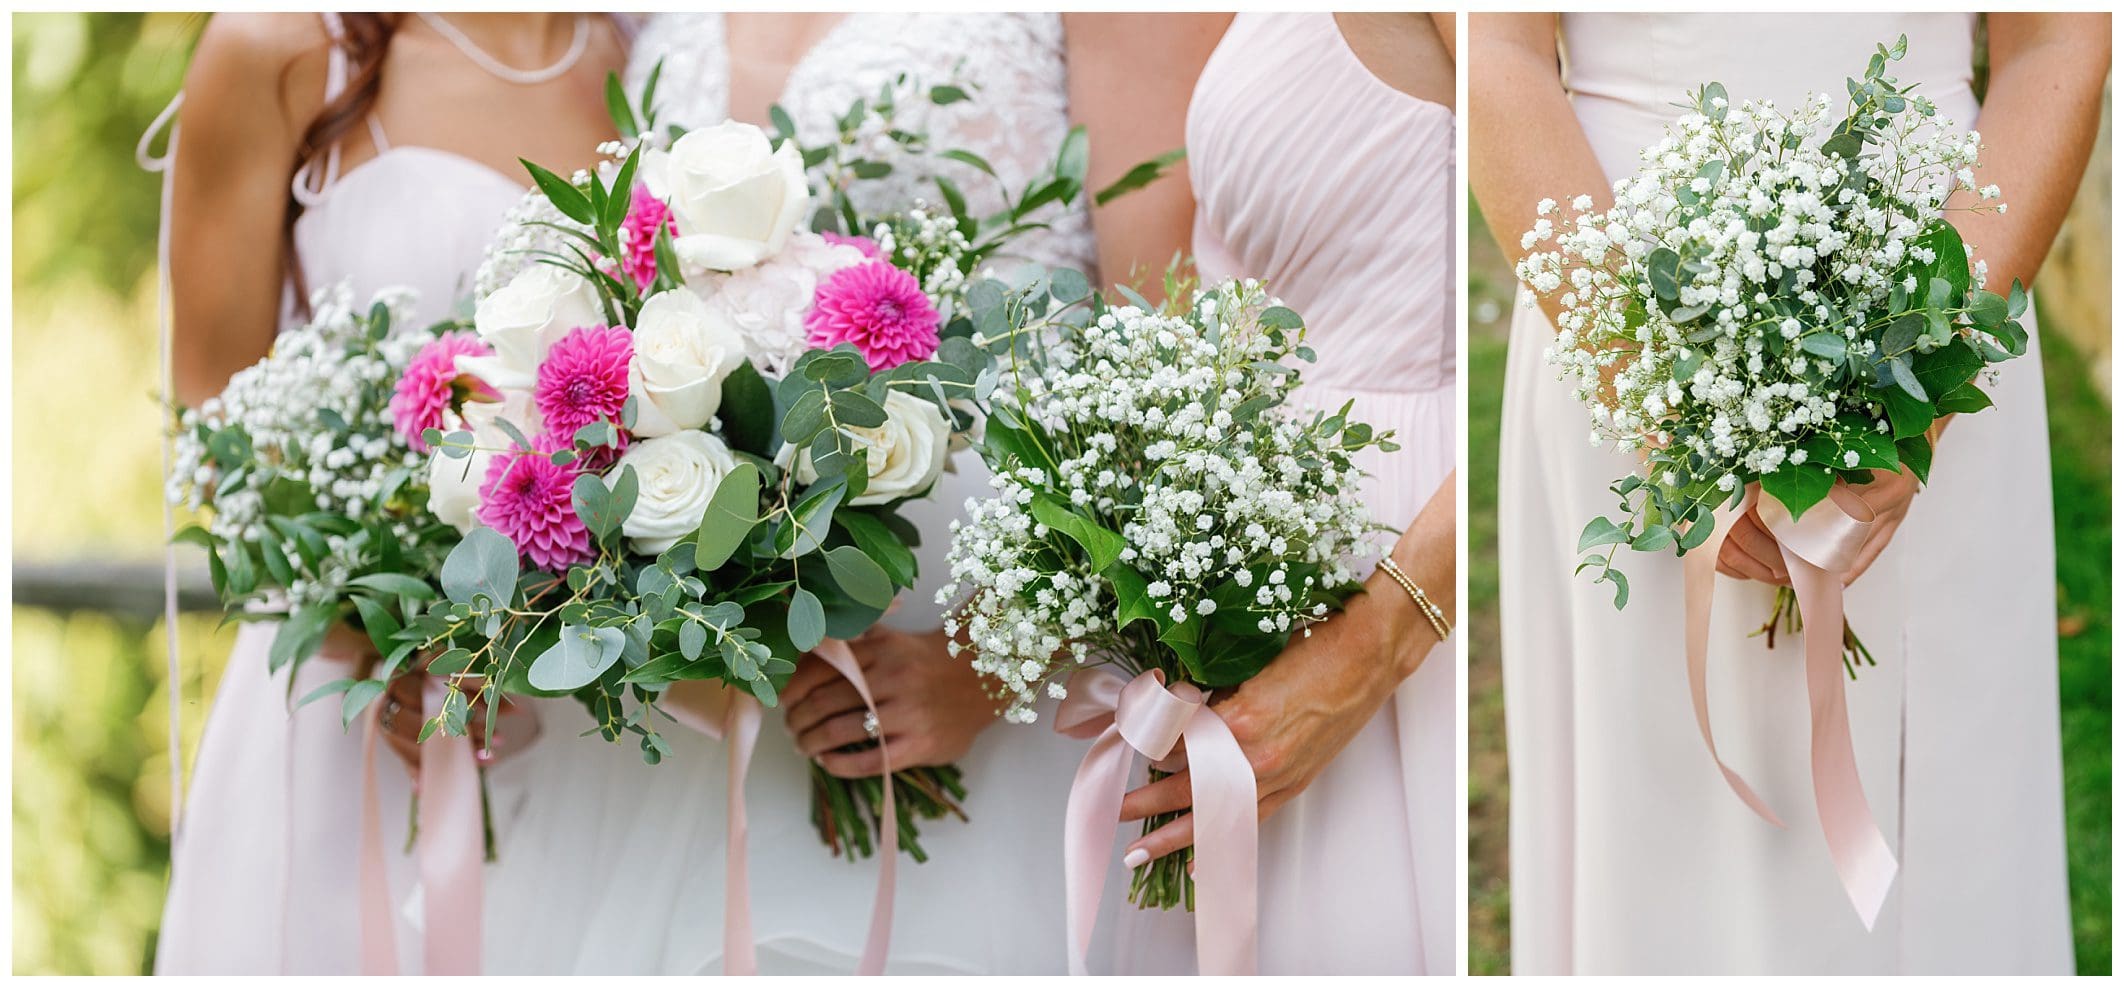 Four pictures of bridesmaids holding bouquets.